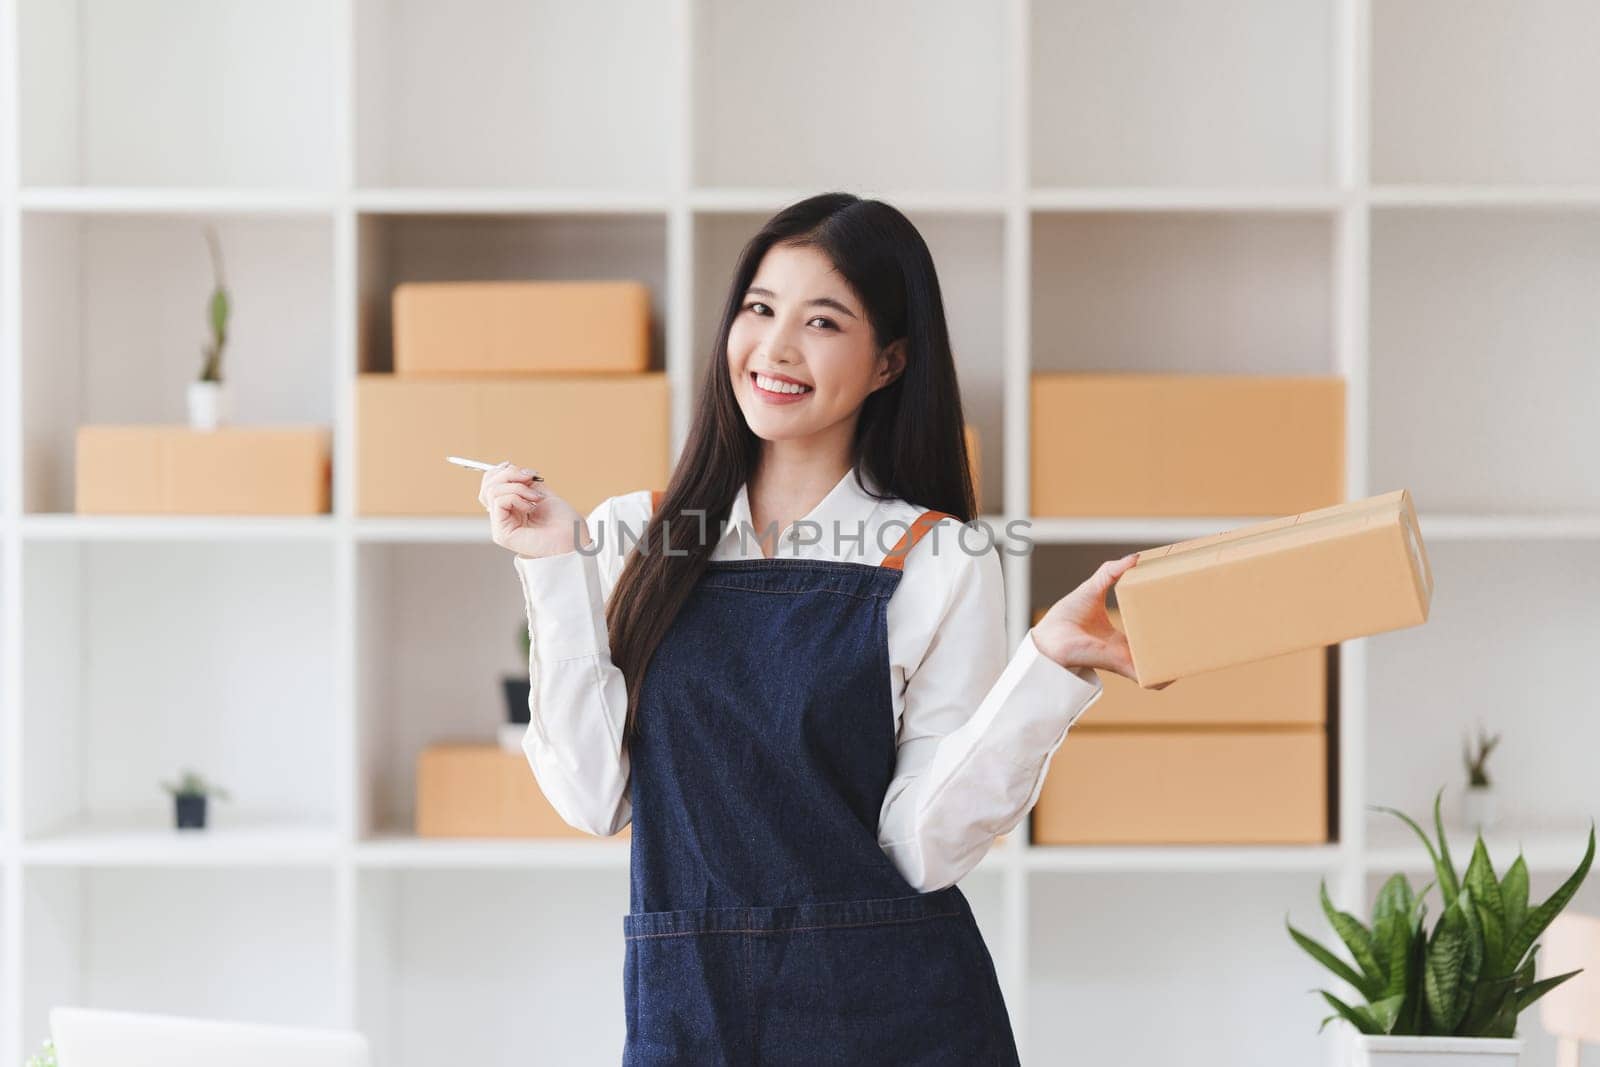 Small businesses SME owners female entrepreneurs check online orders to prepare to pack the boxes, sell to customers, sme business ideas online by itchaznong